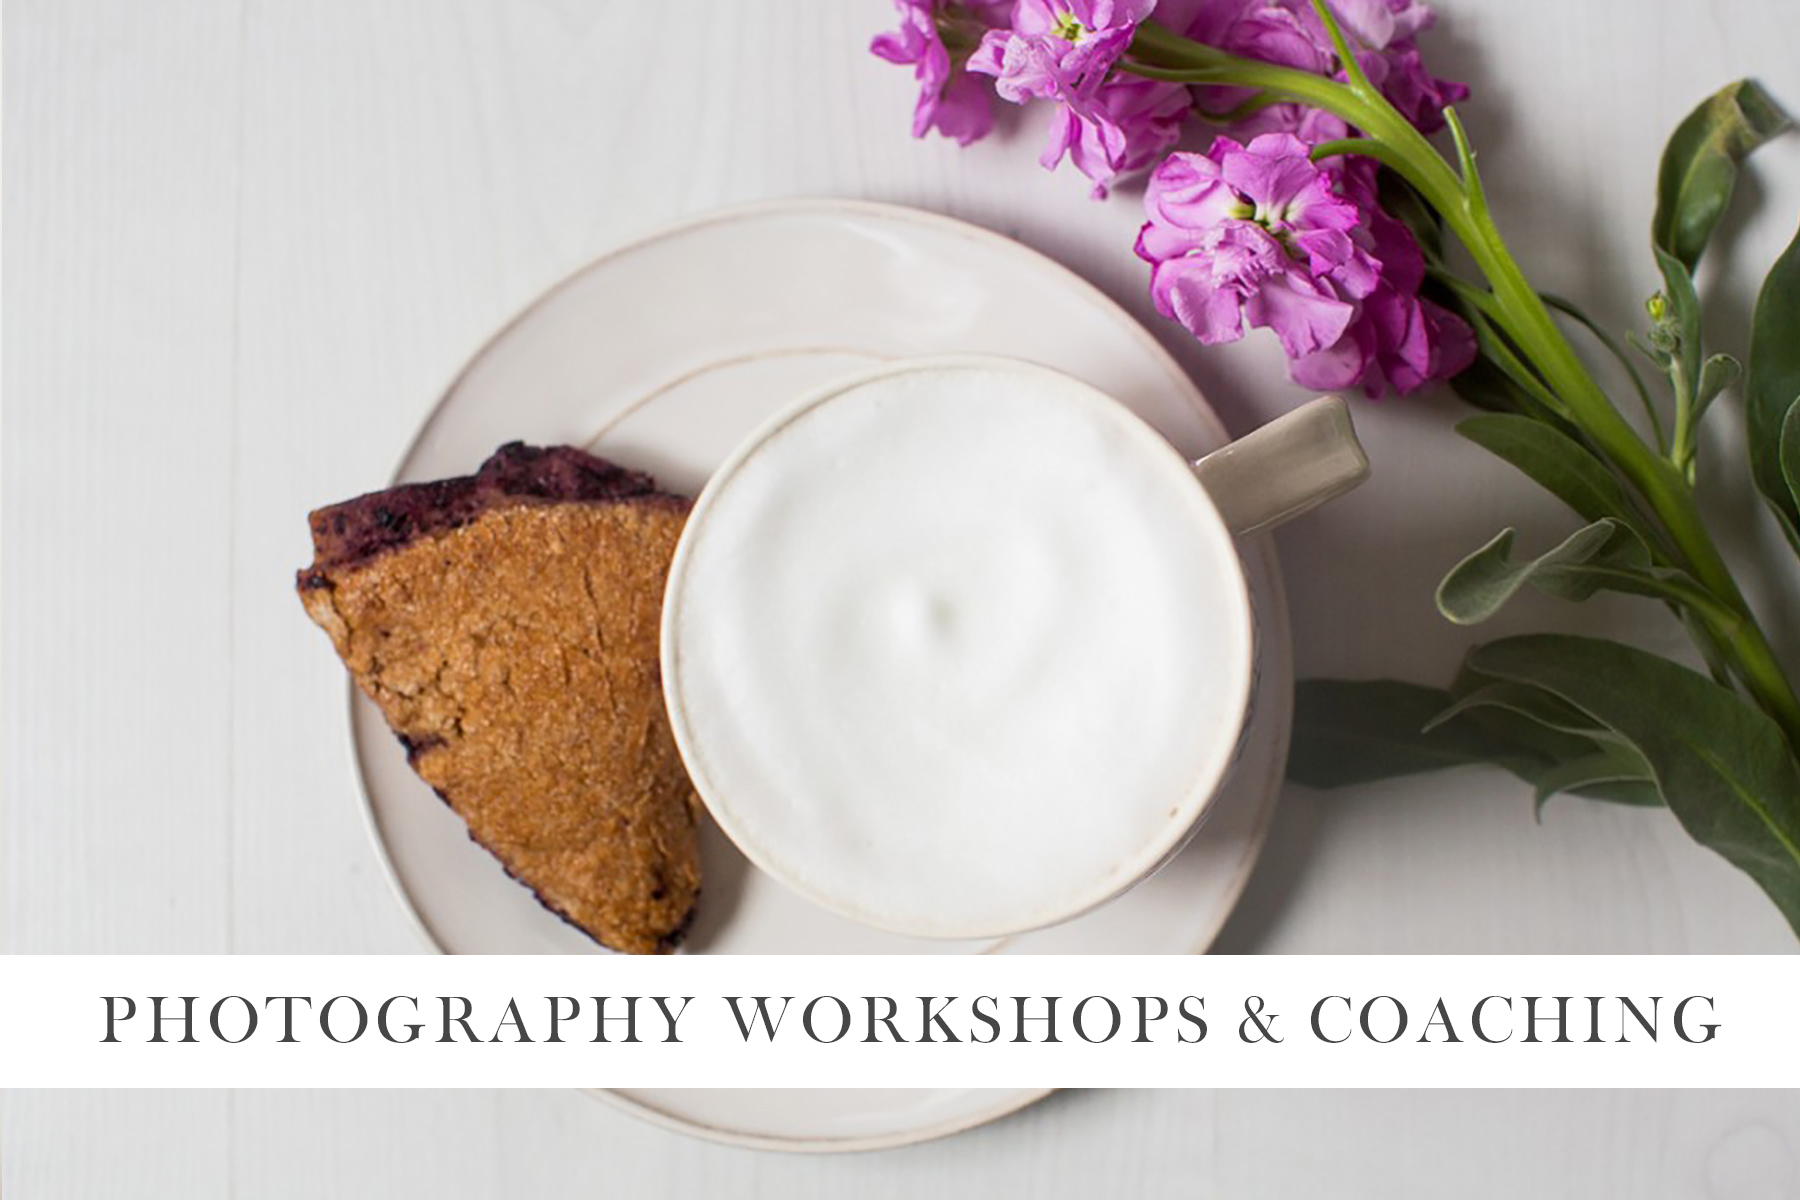 How to start a photography business Photography Workshop Photography Coaching Newborn Photography Workshops